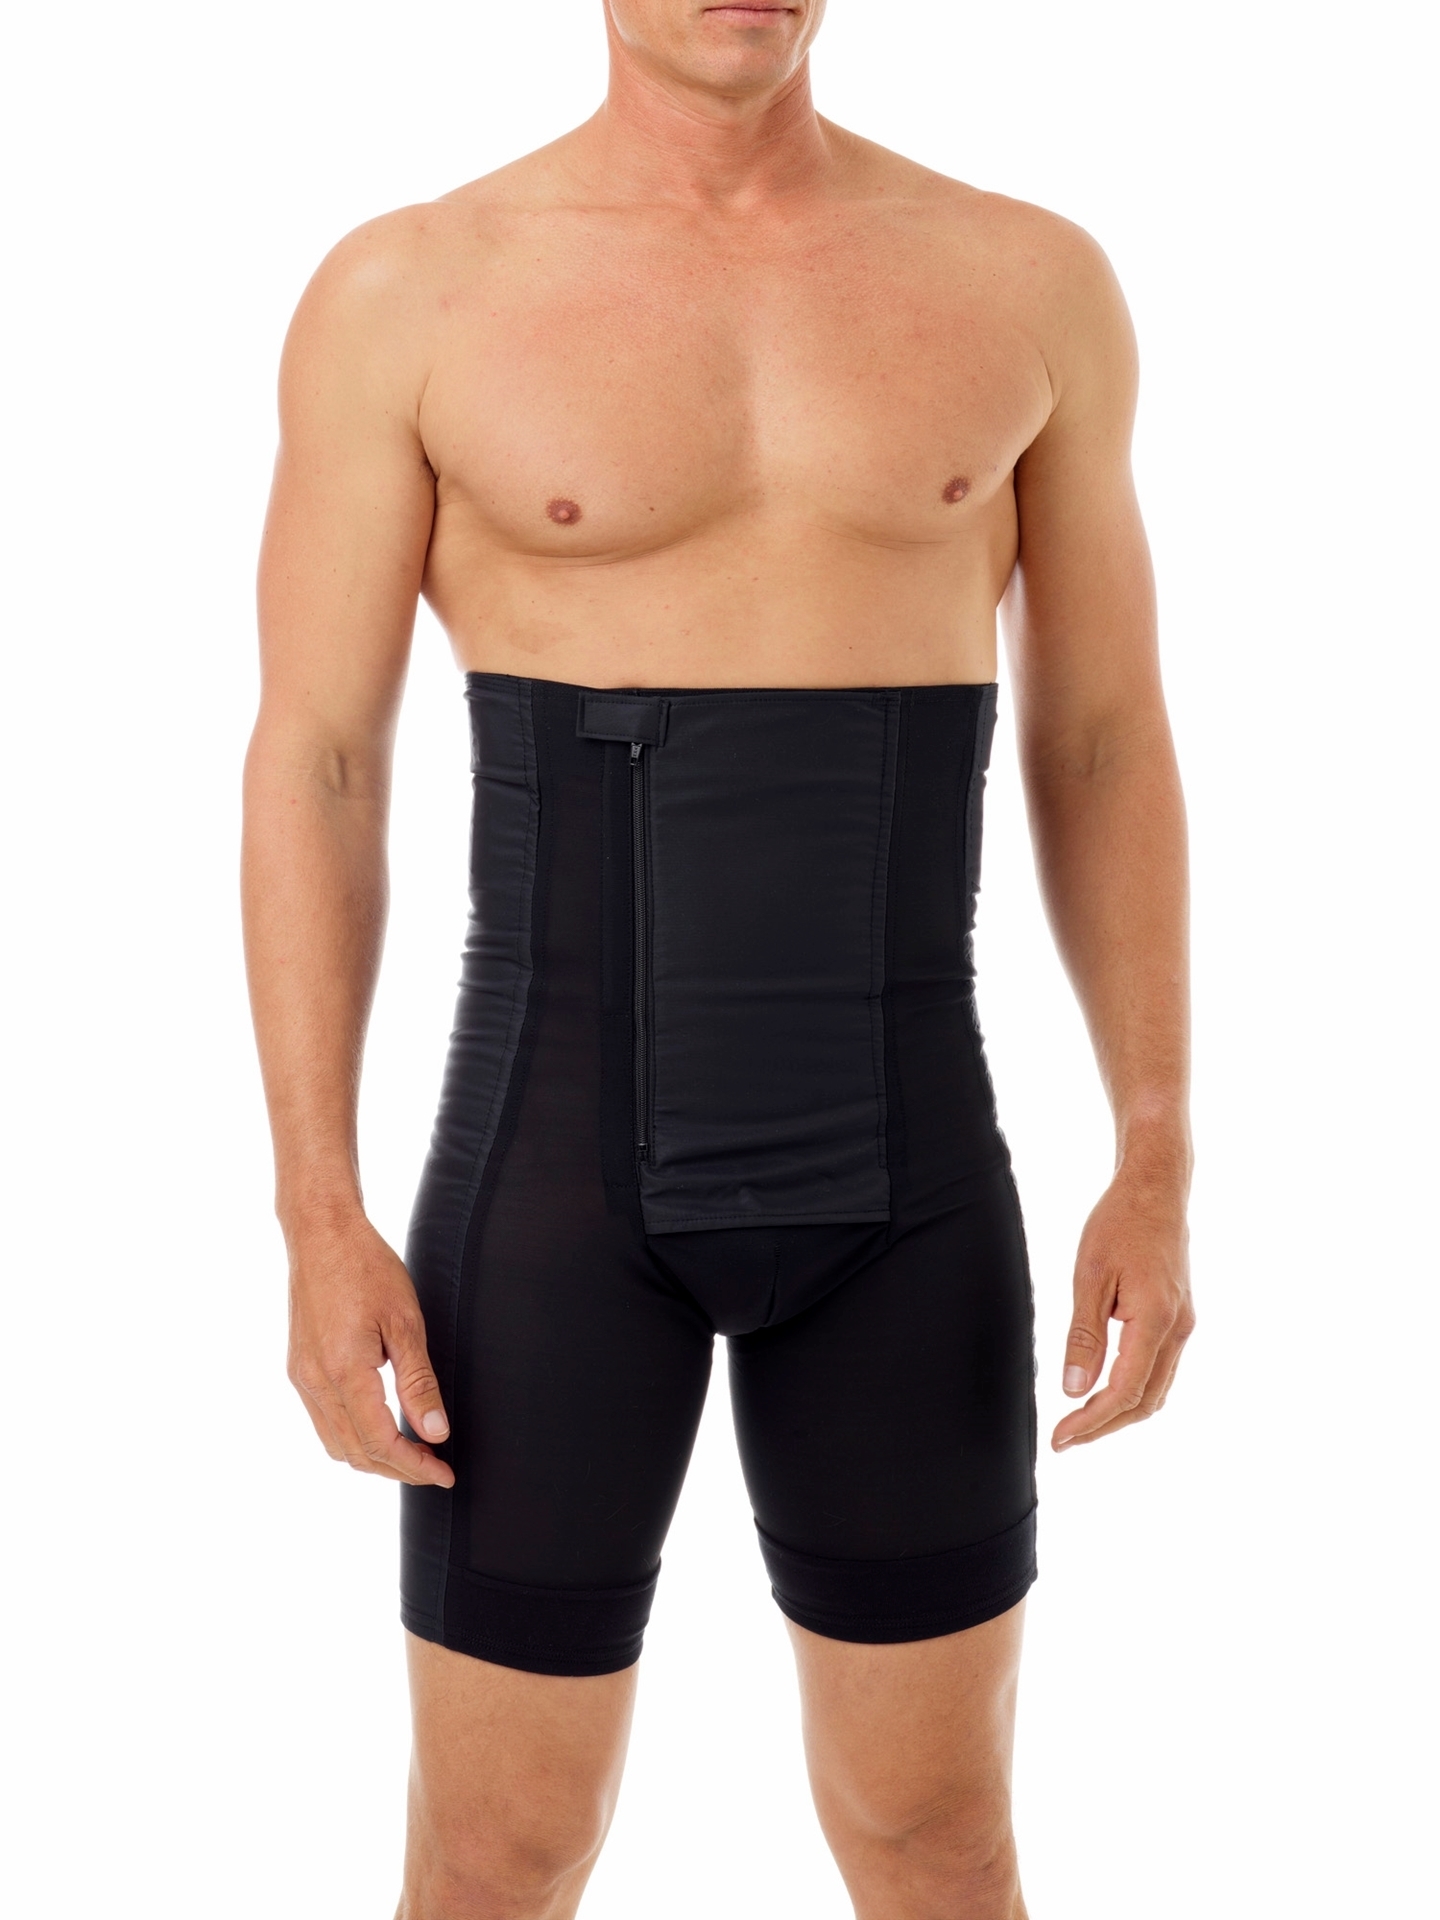 Shop Men's Body Shapers, Free Shipping Over $75